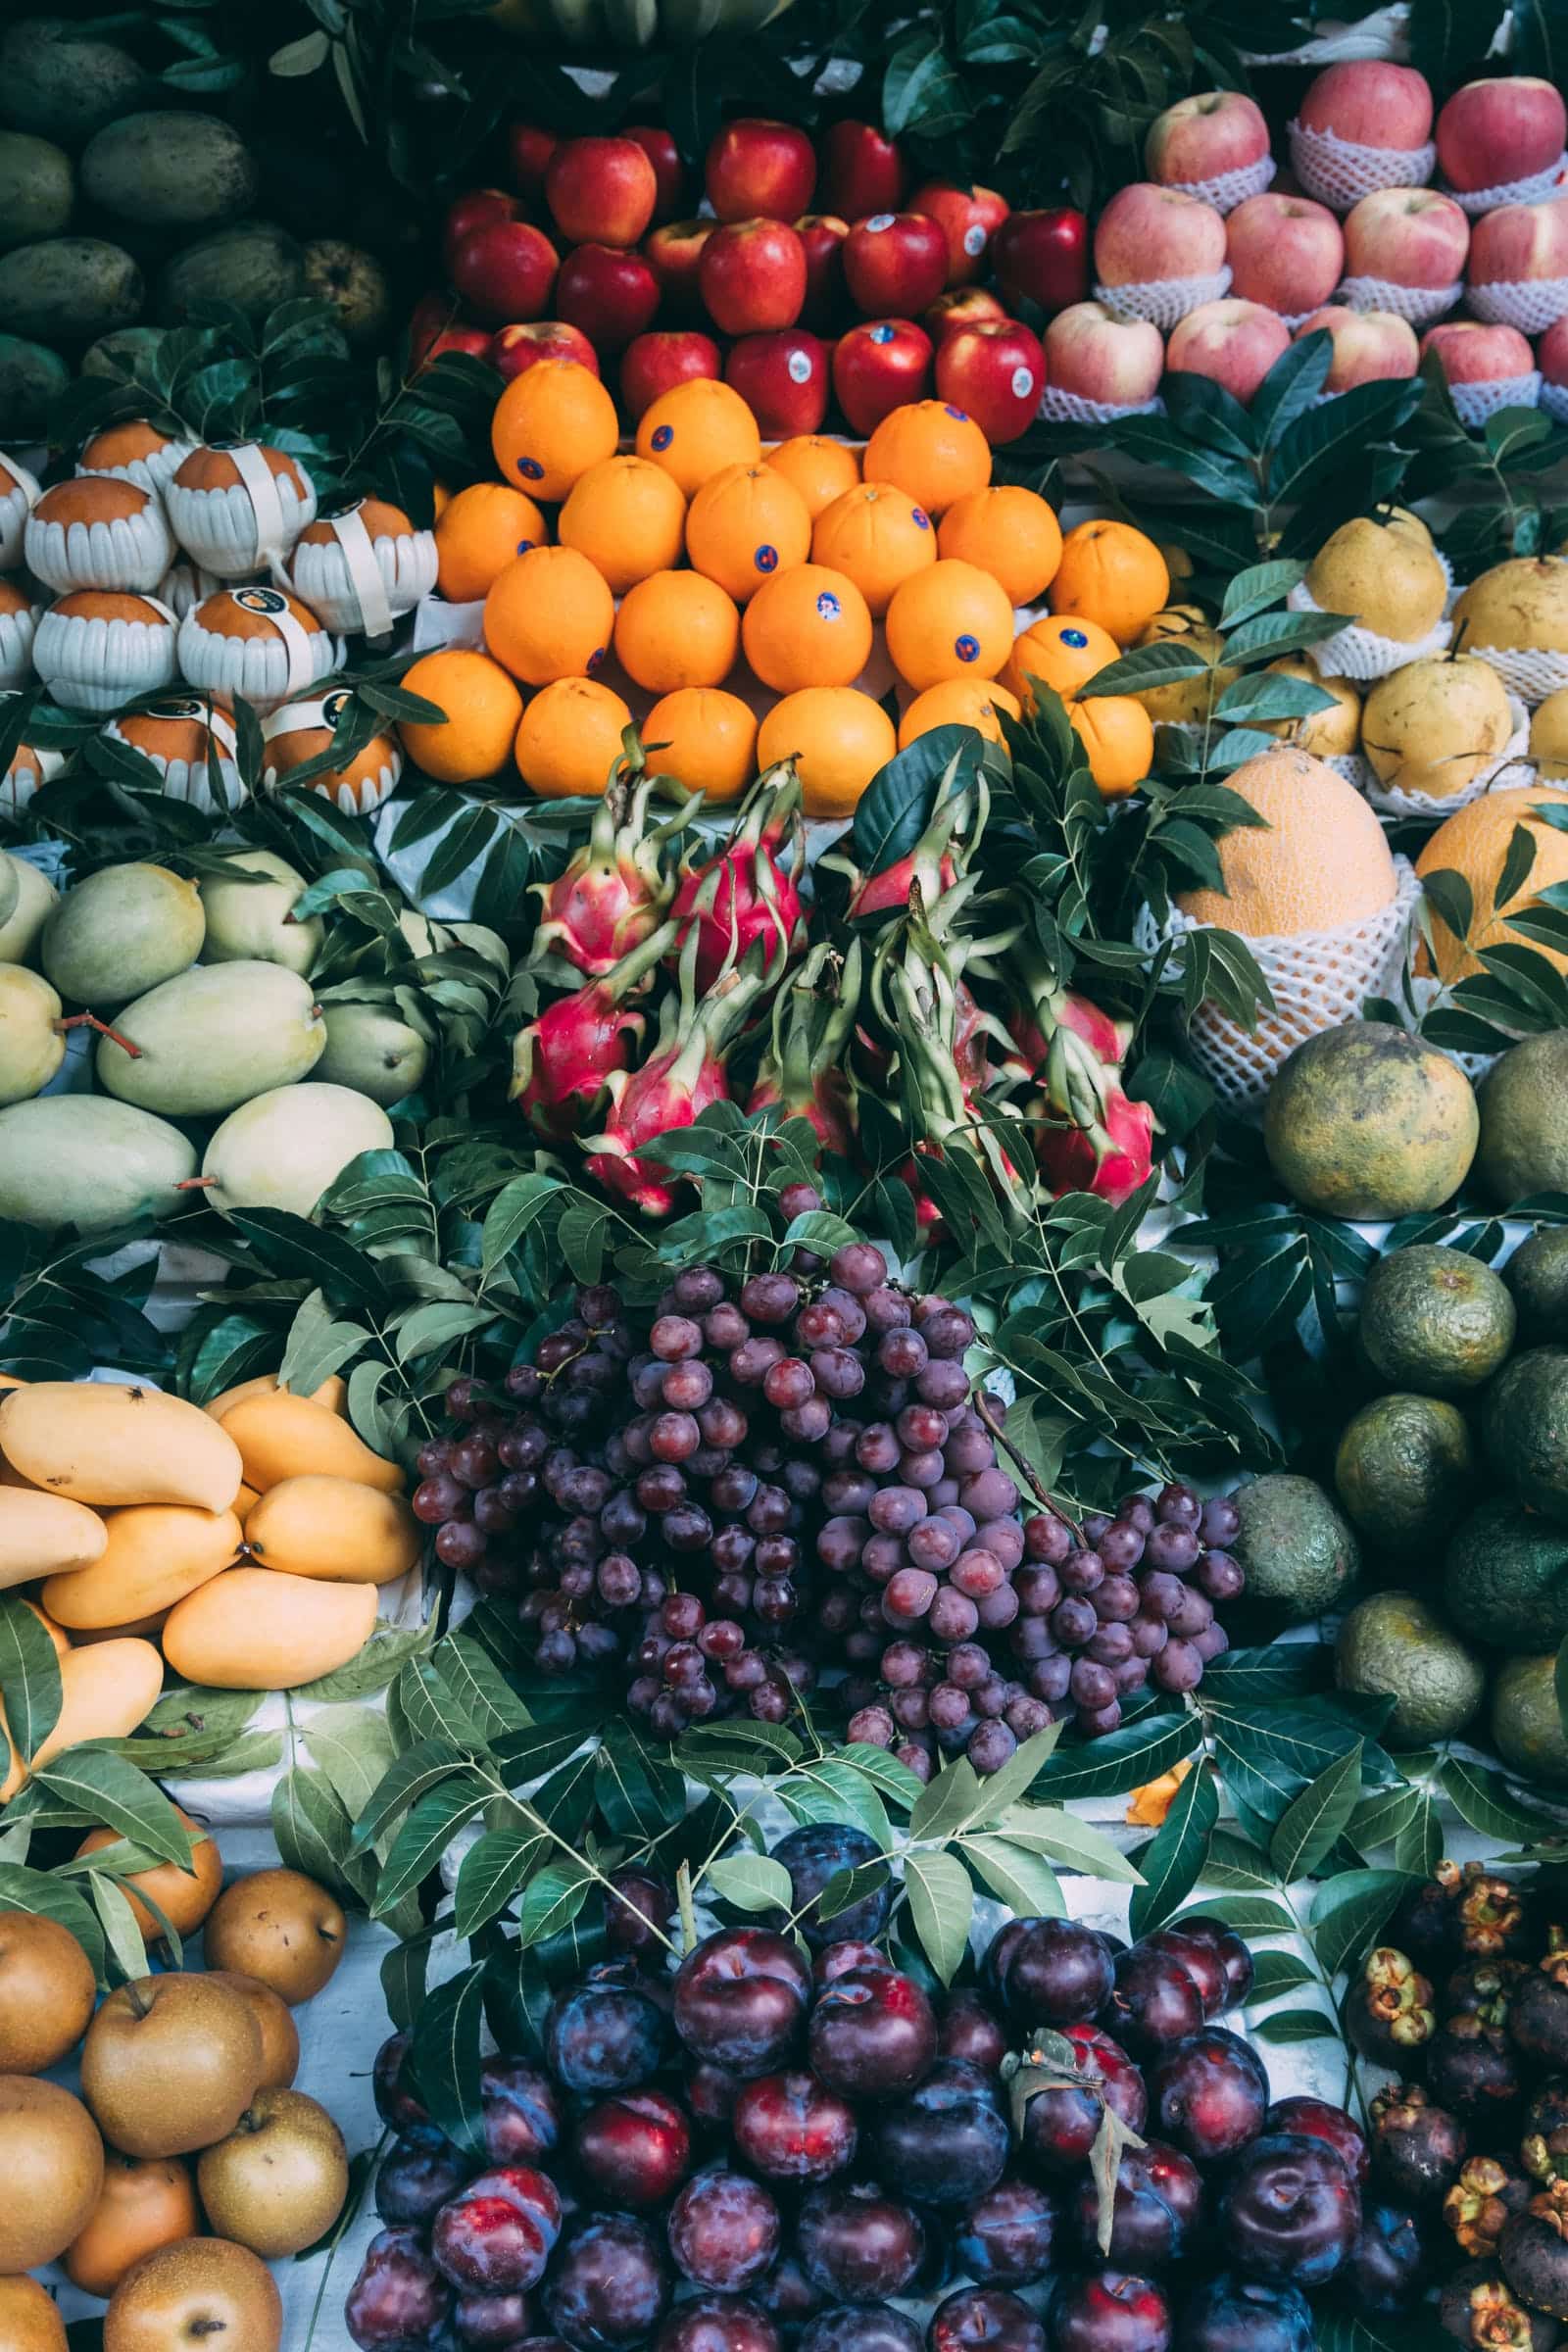 A photo of farm produce including oranges, grapes, apples and plums